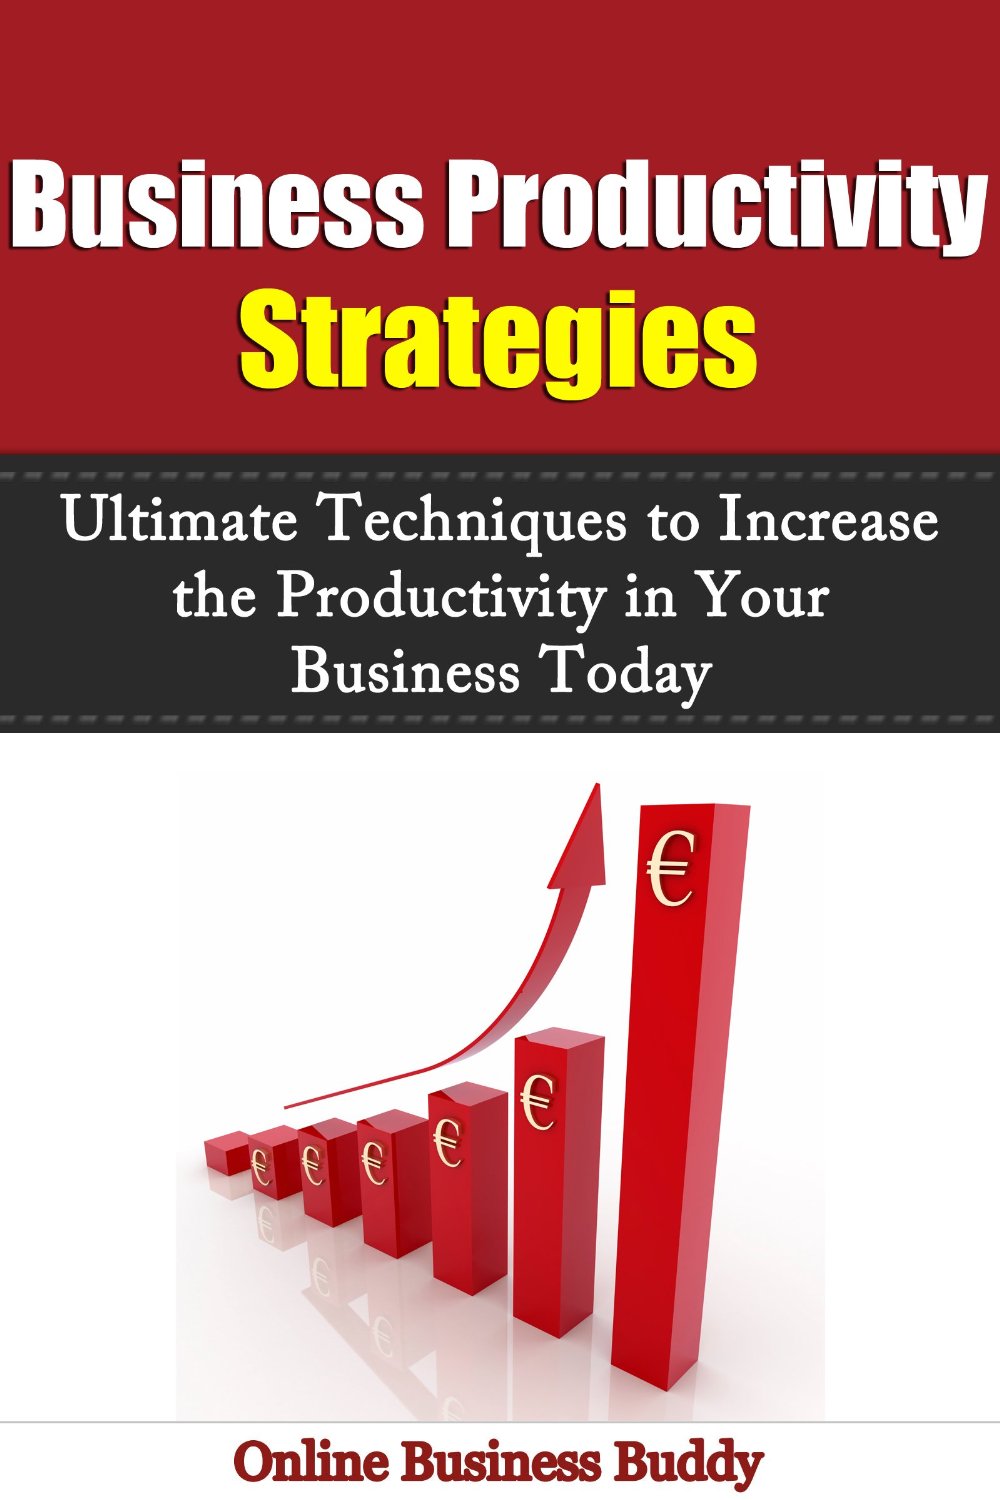 Business Productivity Strategies: Ultimate Techniques to Increase the Productivity in Your Business Today! by Simone Lea